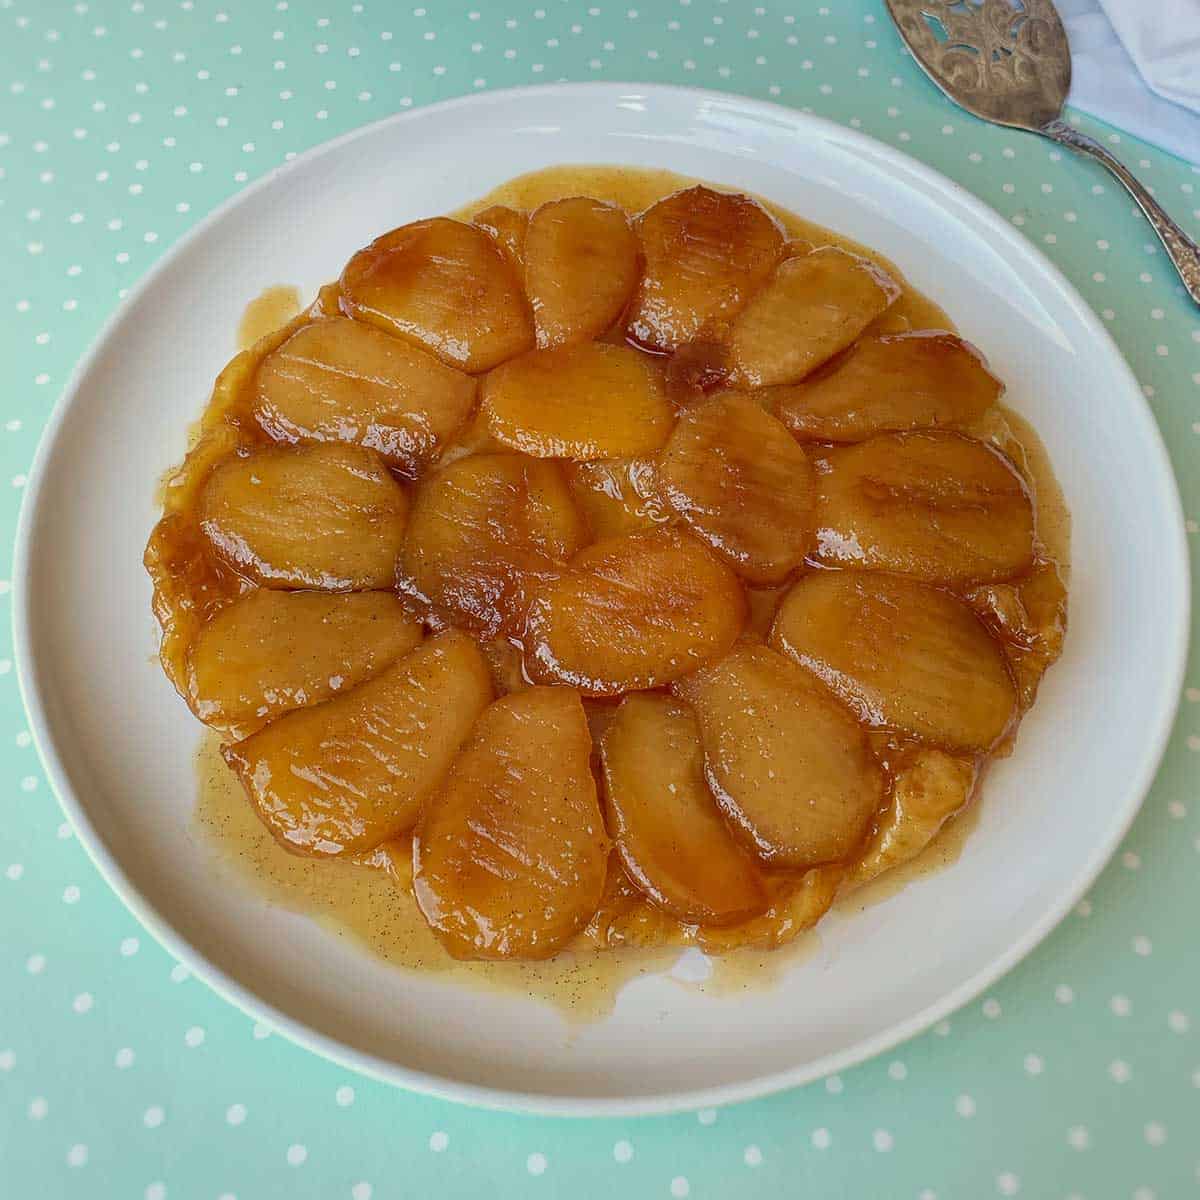 A cooked Tarte Tartin on a white plate.